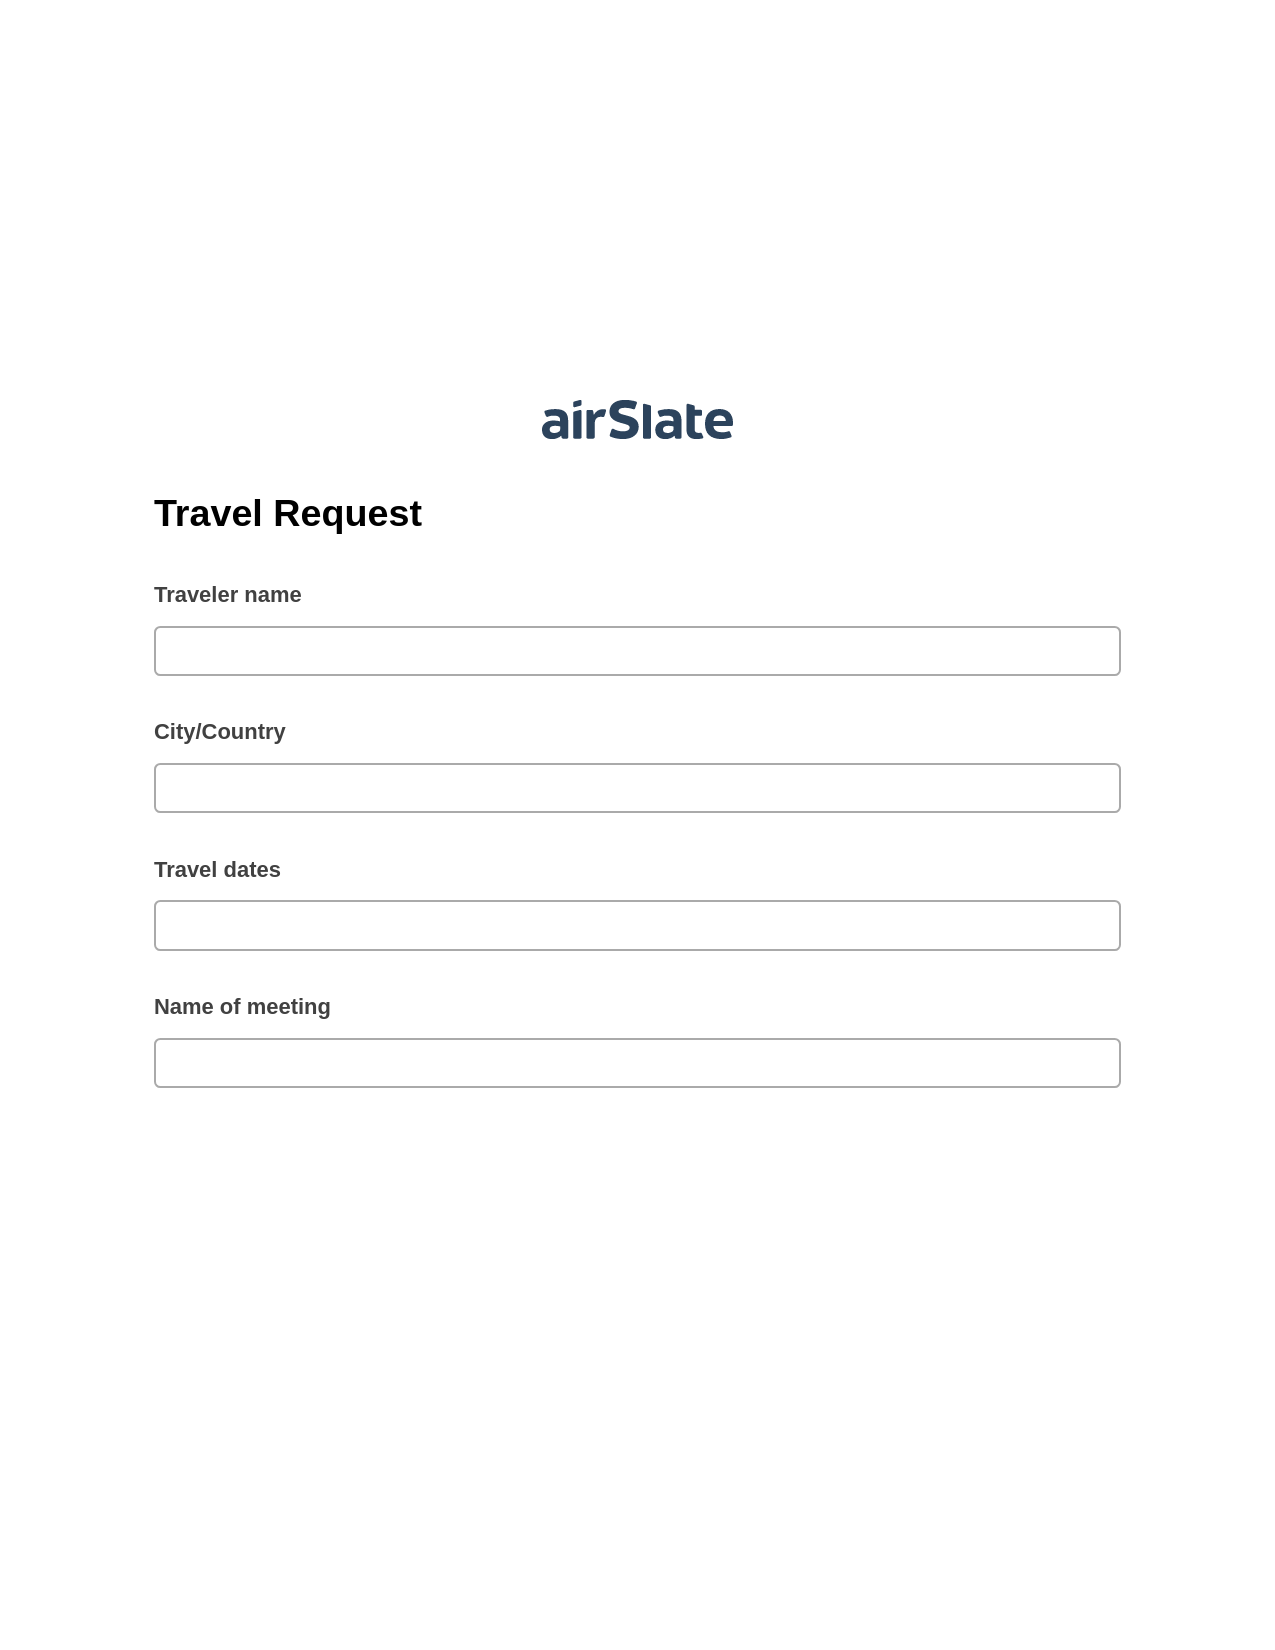 Travel Request Pre-fill Dropdowns from CSV File Bot, Create Slate Reminder Bot, Archive to SharePoint Folder Bot